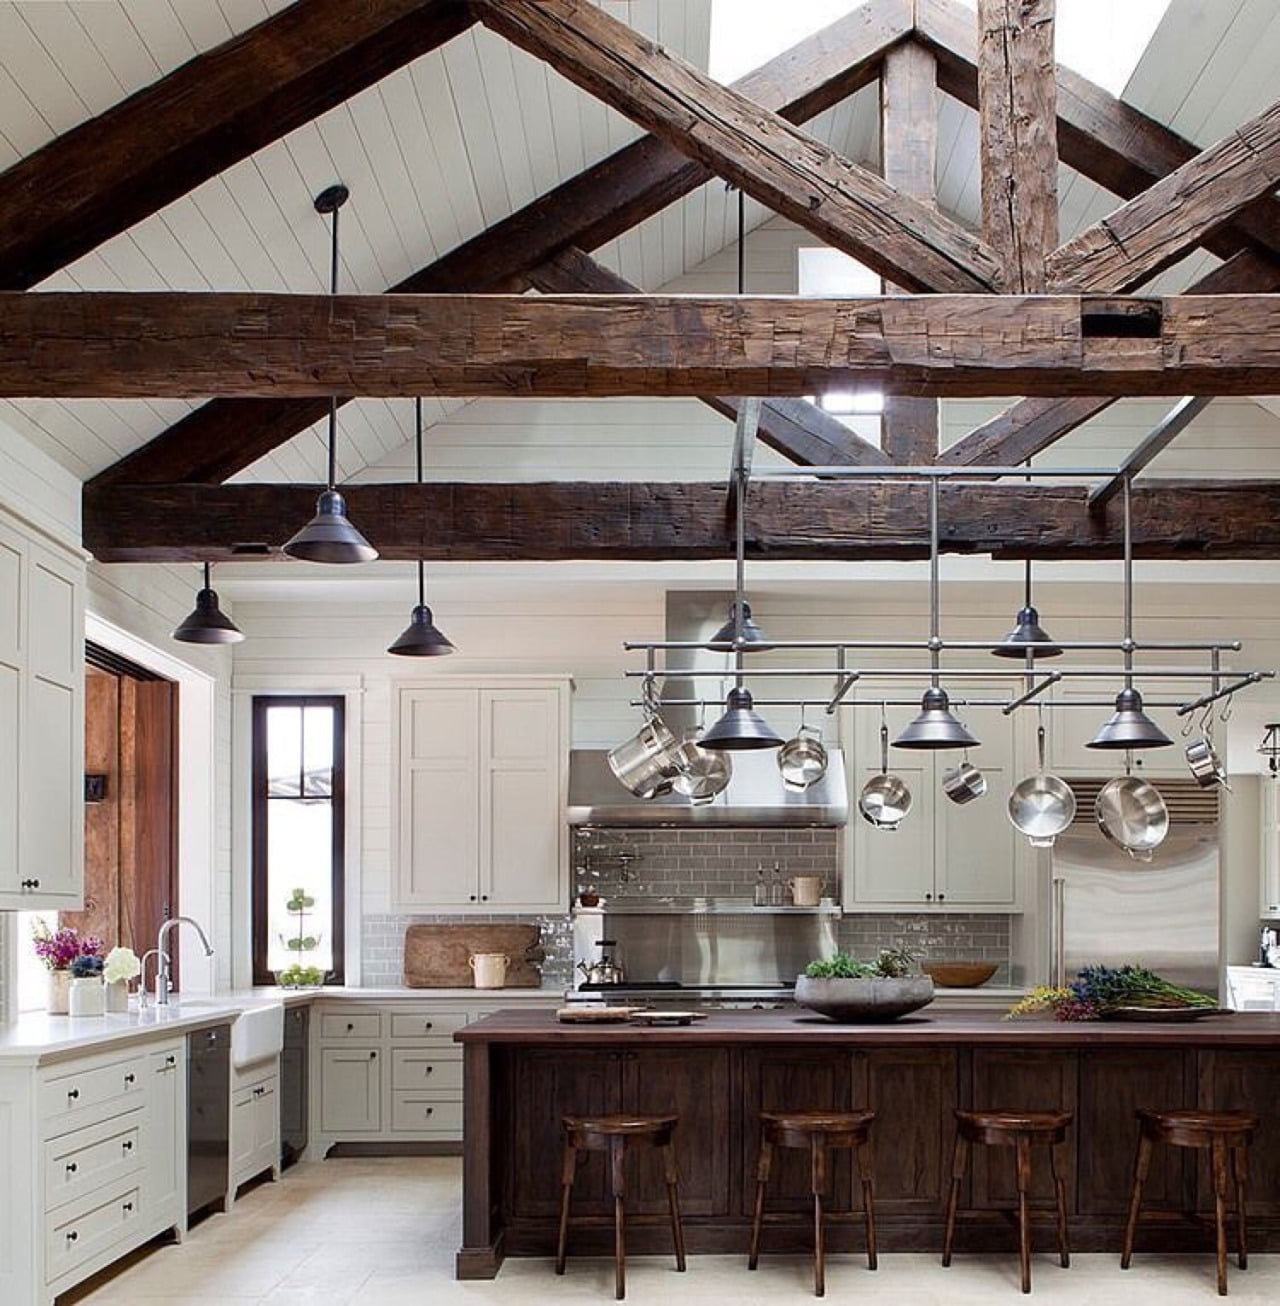 23 Best Rustic Country Kitchen Design Ideas and Decorations for 2017